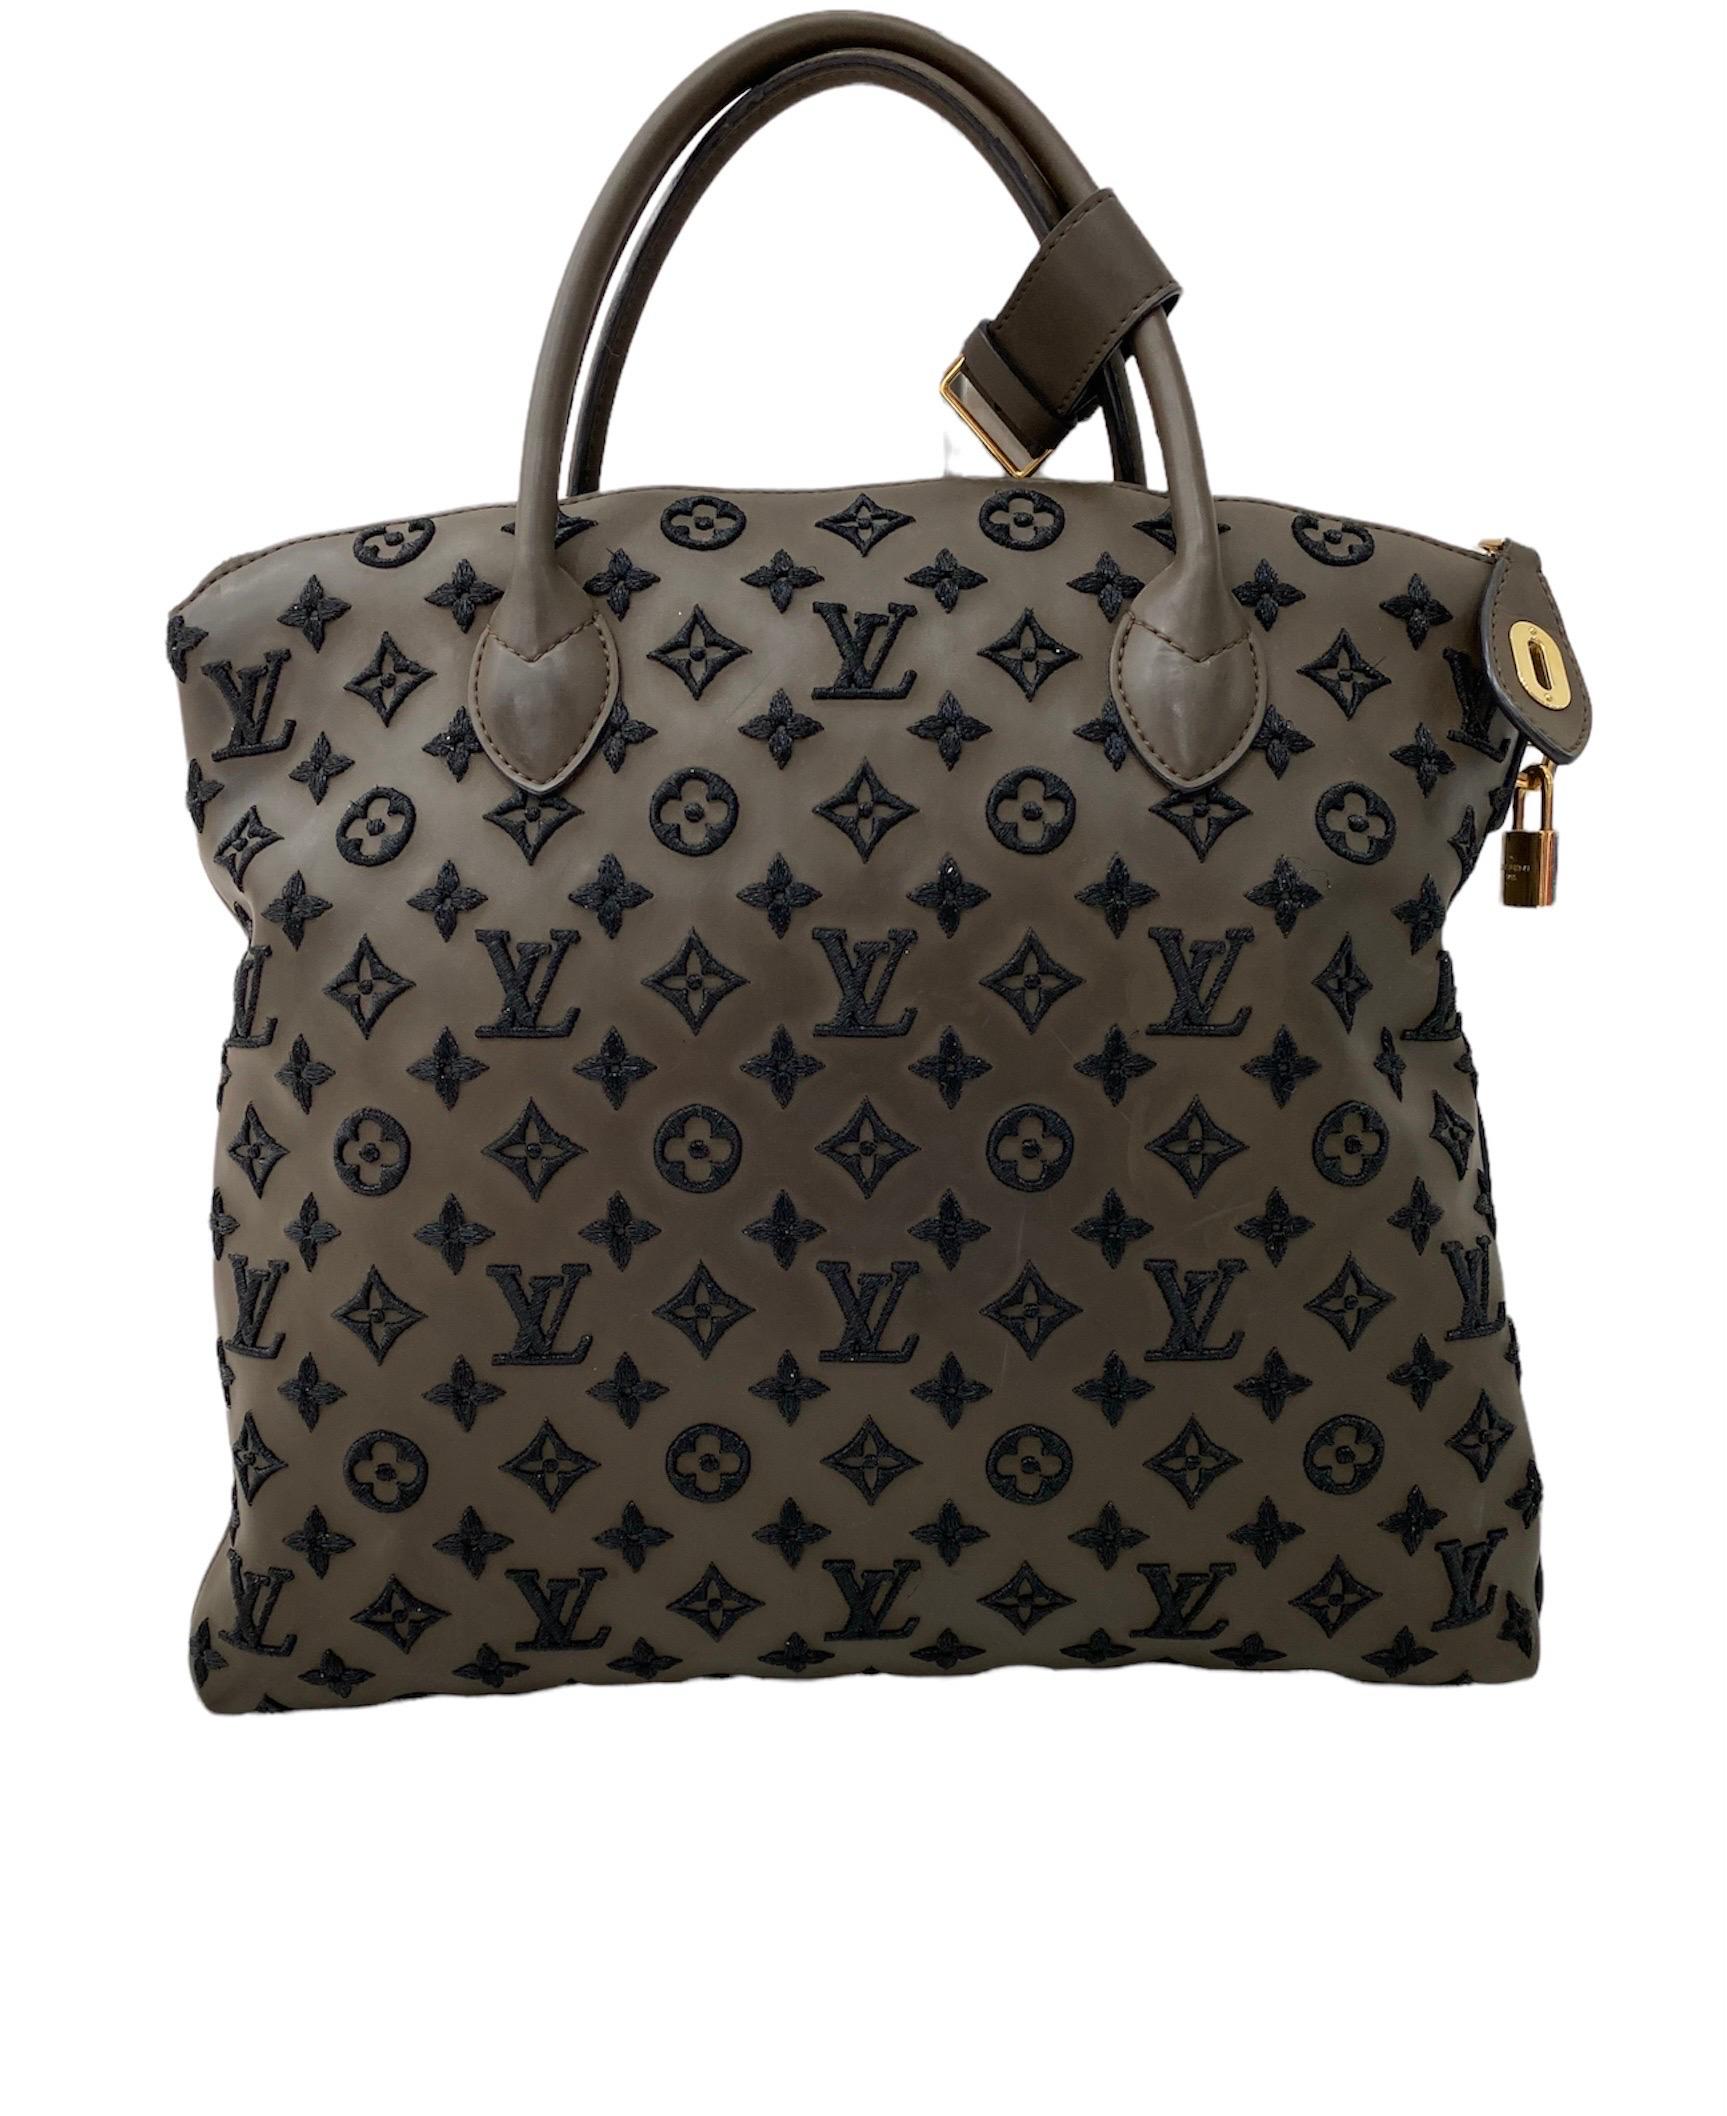 louis vuitton knockoff bags